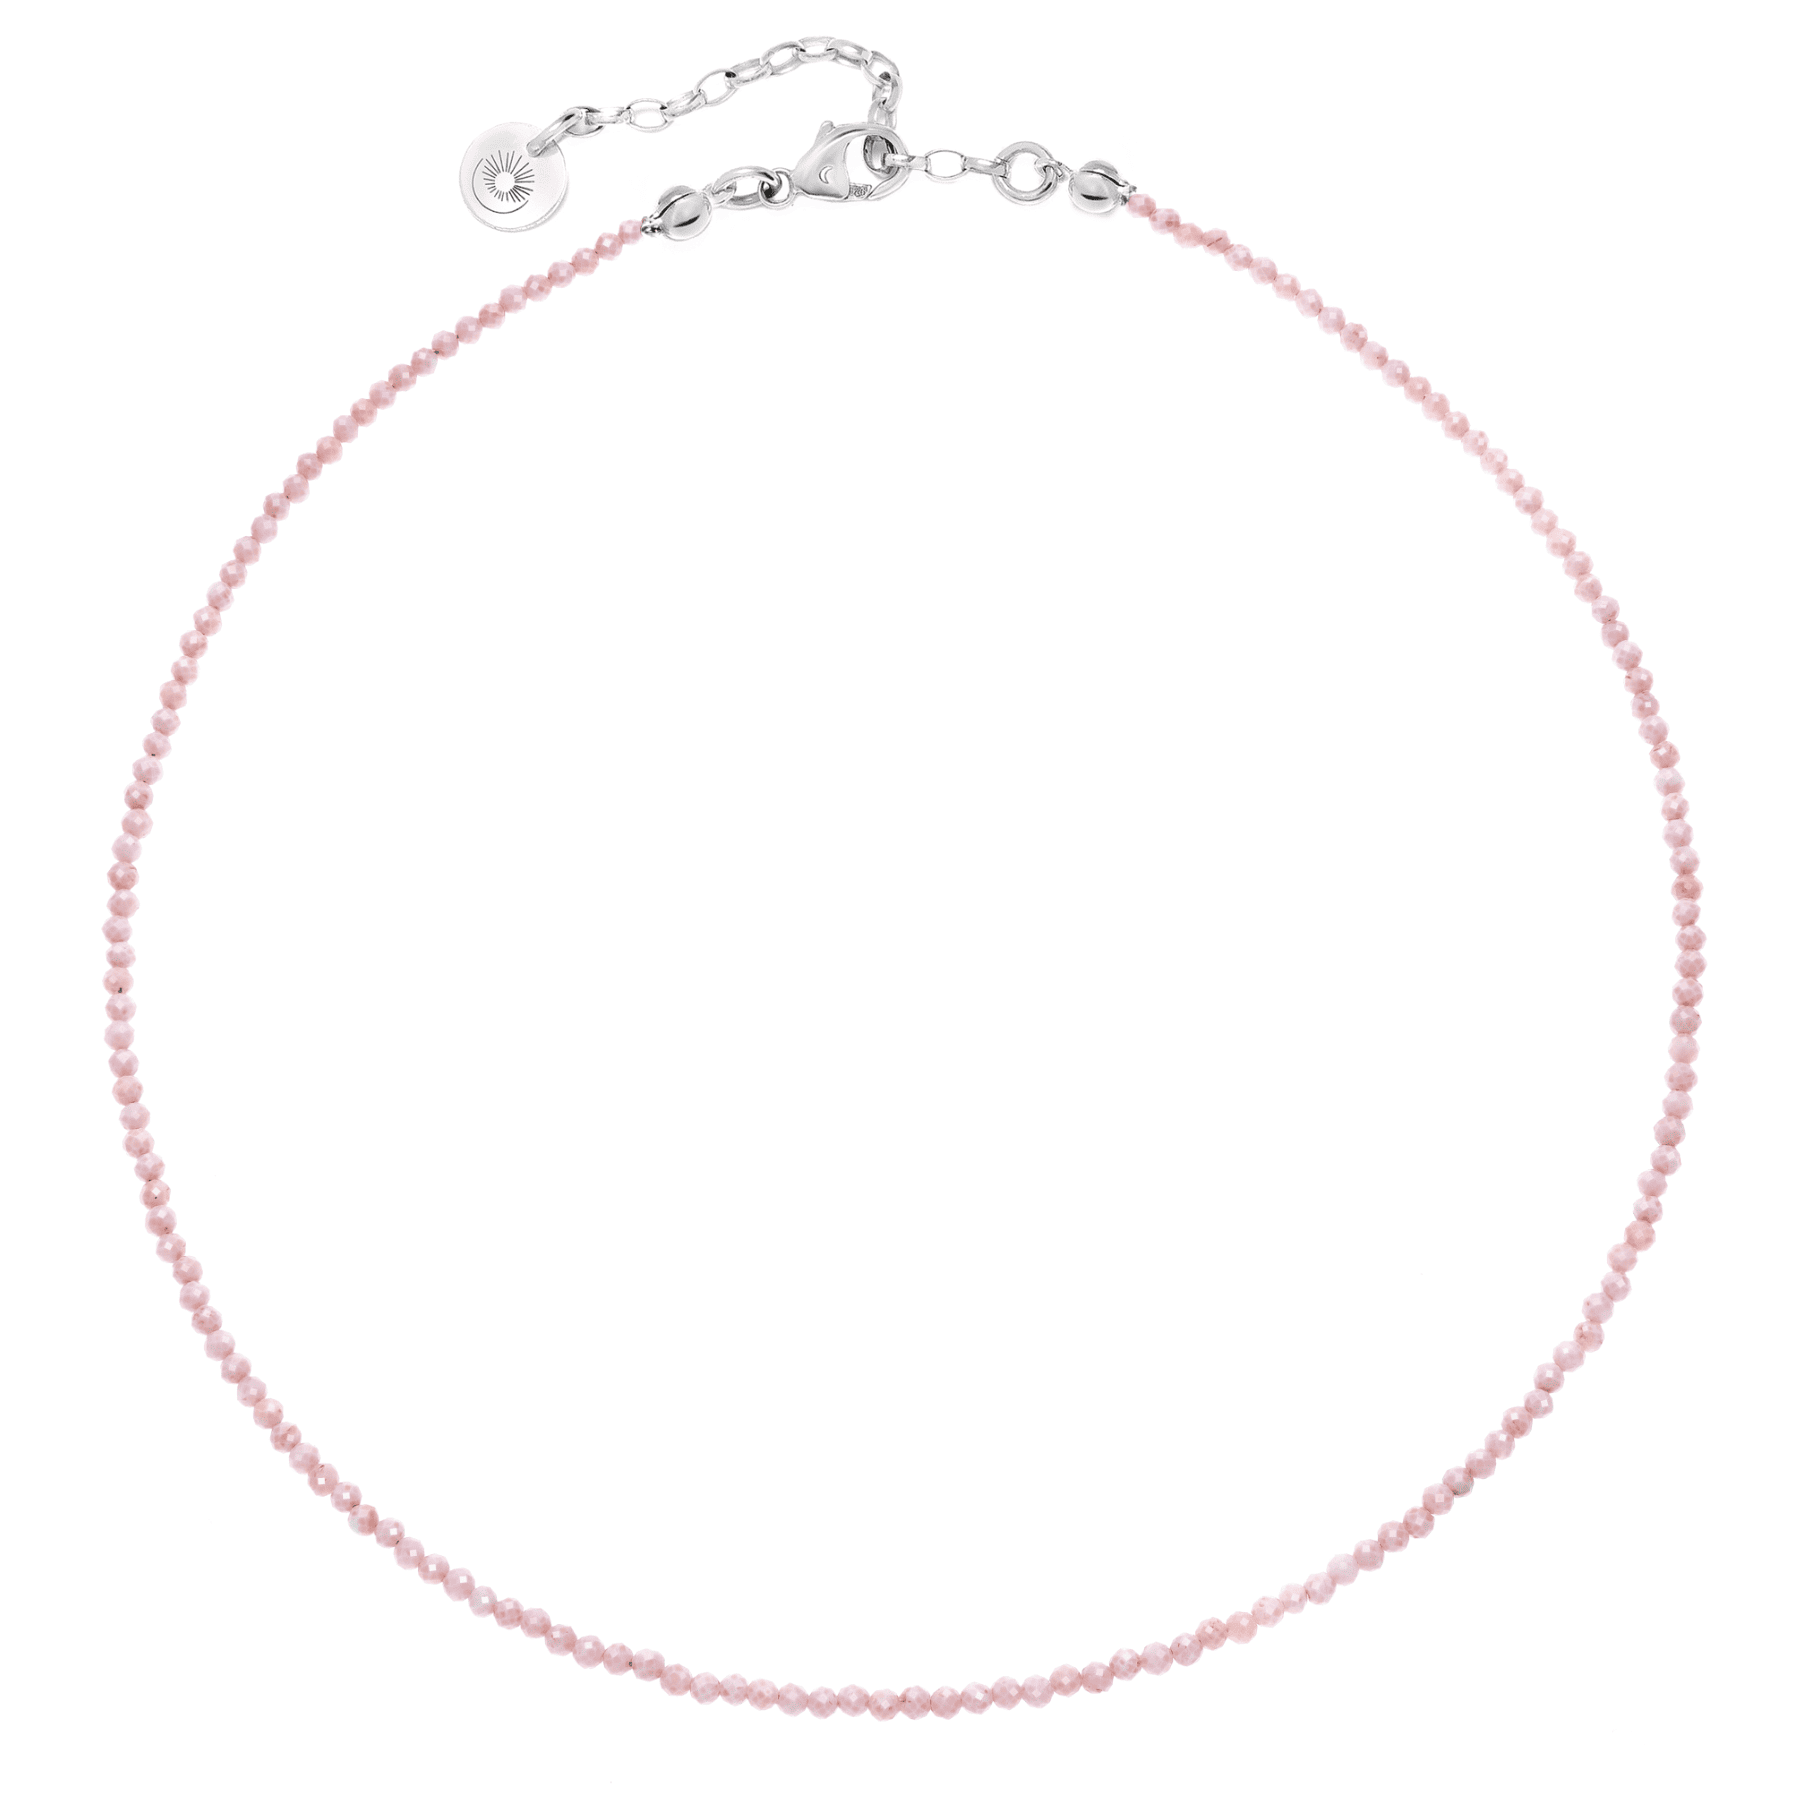 Pink choker necklace with natural opals on white background